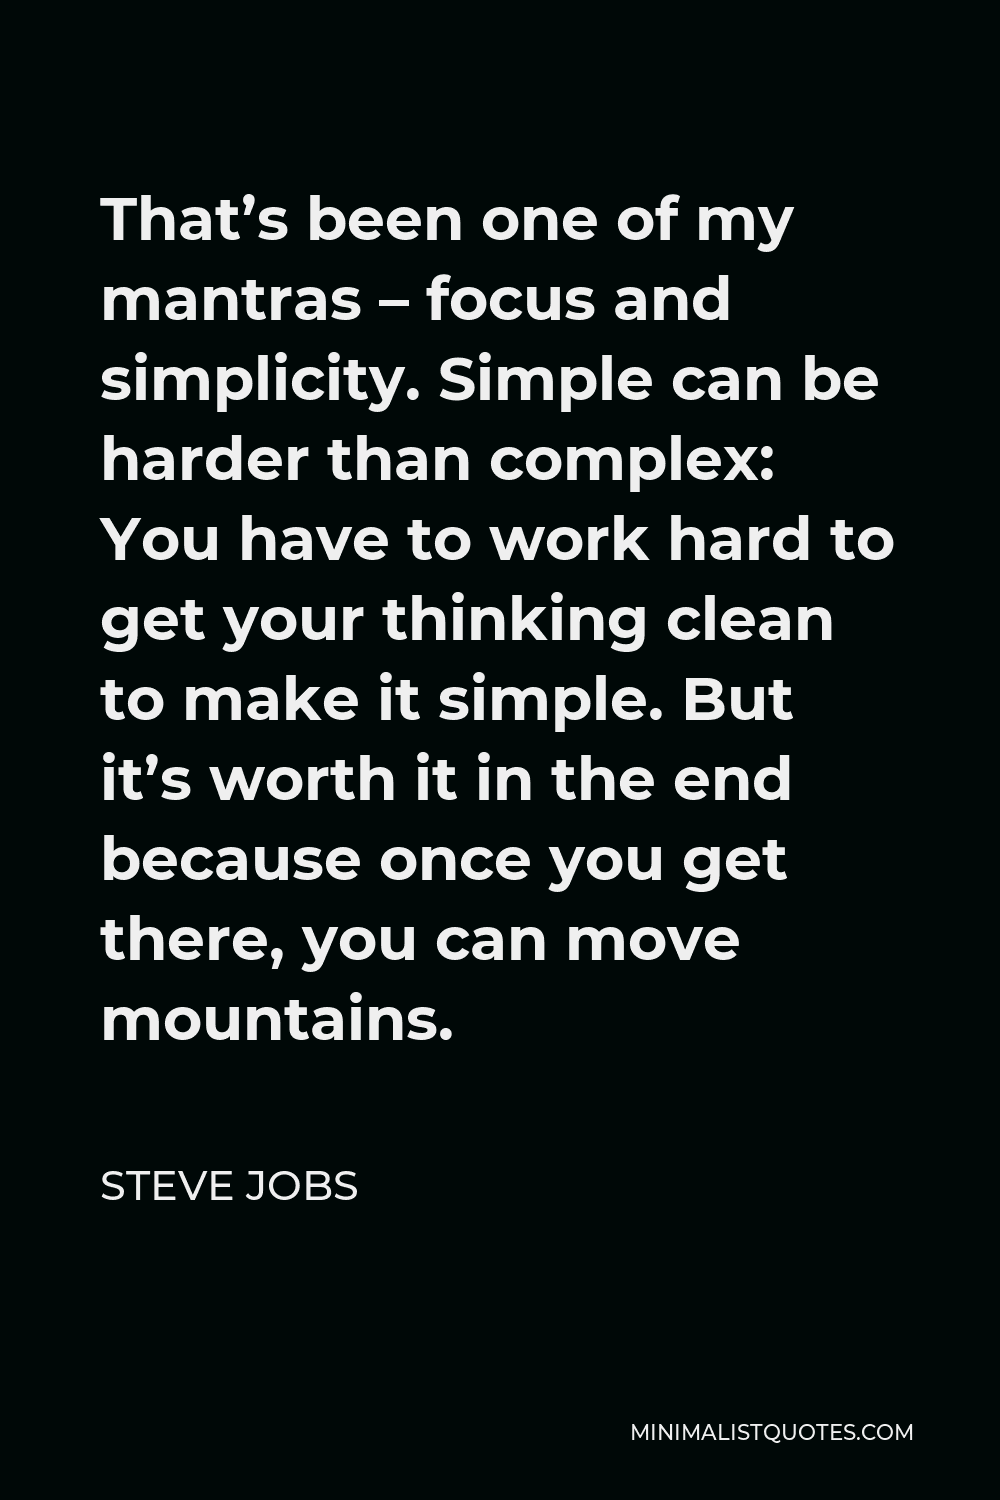 Steve Jobs Quote - That’s been one of my mantras – focus and simplicity. Simple can be harder than complex: You have to work hard to get your thinking clean to make it simple. But it’s worth it in the end because once you get there, you can move mountains.